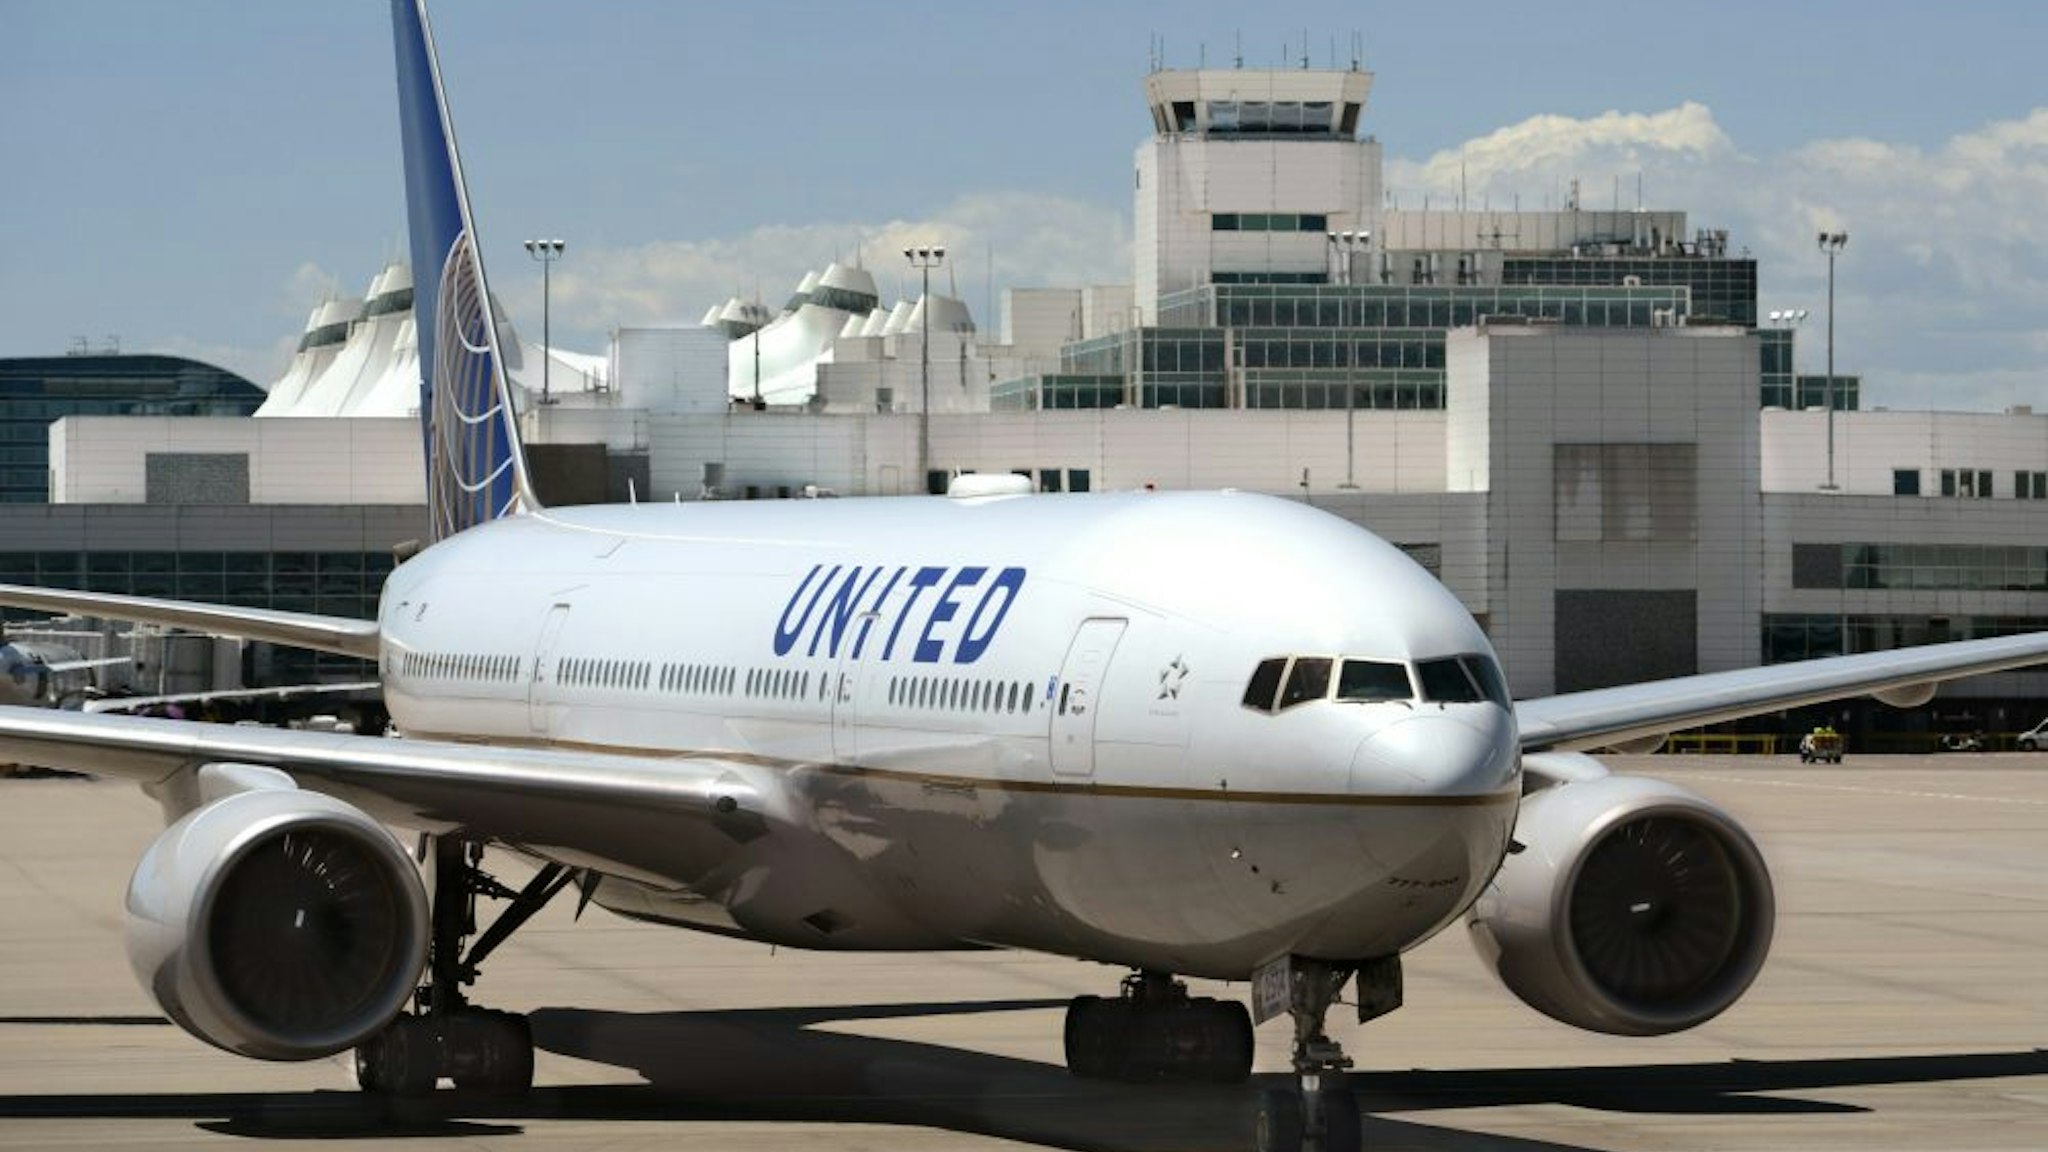 DENVER, COLORADO - JUNE 20, 2019: A United Airlines Boeing 777 passenger aircraft taxis into its gate at Denver International Airport in Denver, Colorado.